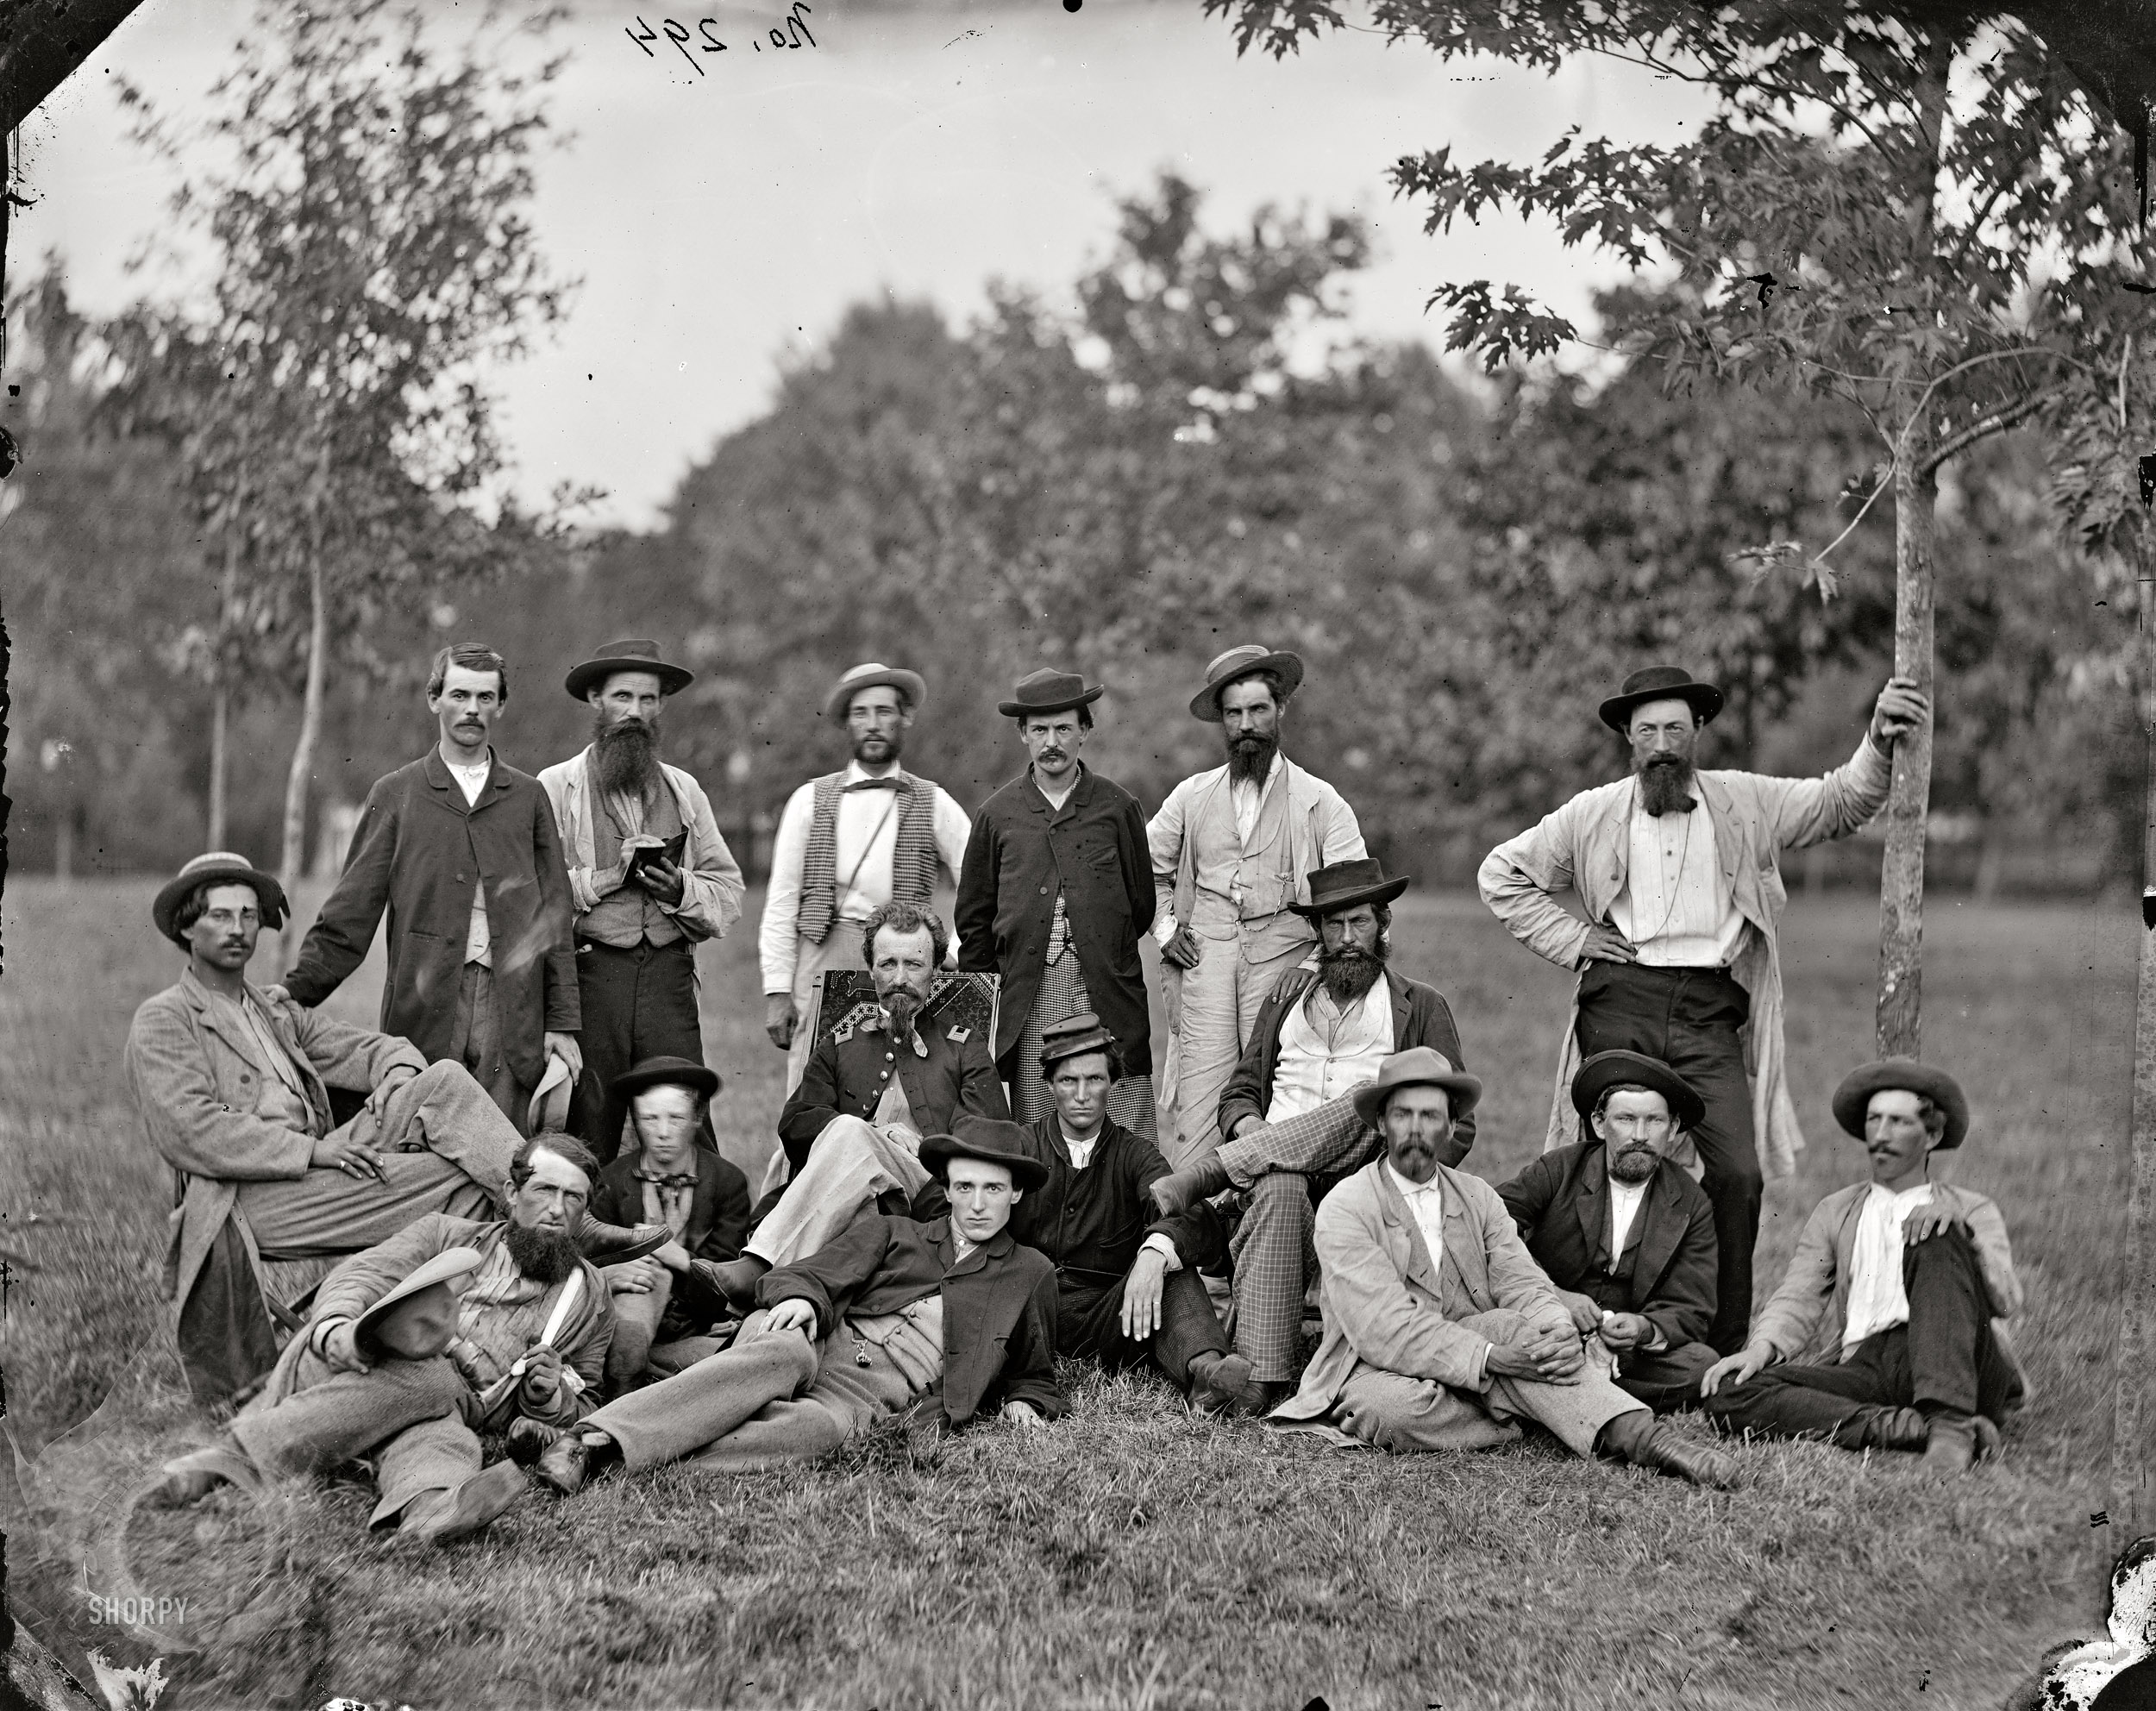 March 1864. "Brandy Station, Virginia. Scouts and guides of the Army of the Potomac." From photographs of the main Eastern theater of the war, winter quarters at Brandy Station. Standing, left to right: James Doughty, James Cammack (?), unknown, Henry W. Dodd, unknown, unknown. Seated: John Irving, Lt. Robert Klein of the 3d Indiana Cavalry, Dan Cole. On ground: Dan Plue, Lt. Klein's son, W.J. Lee, unknown, Mr. Wood, Sanford Magee, John W. Langdon. Wet-plate glass negative, photographer unknown. View full size.